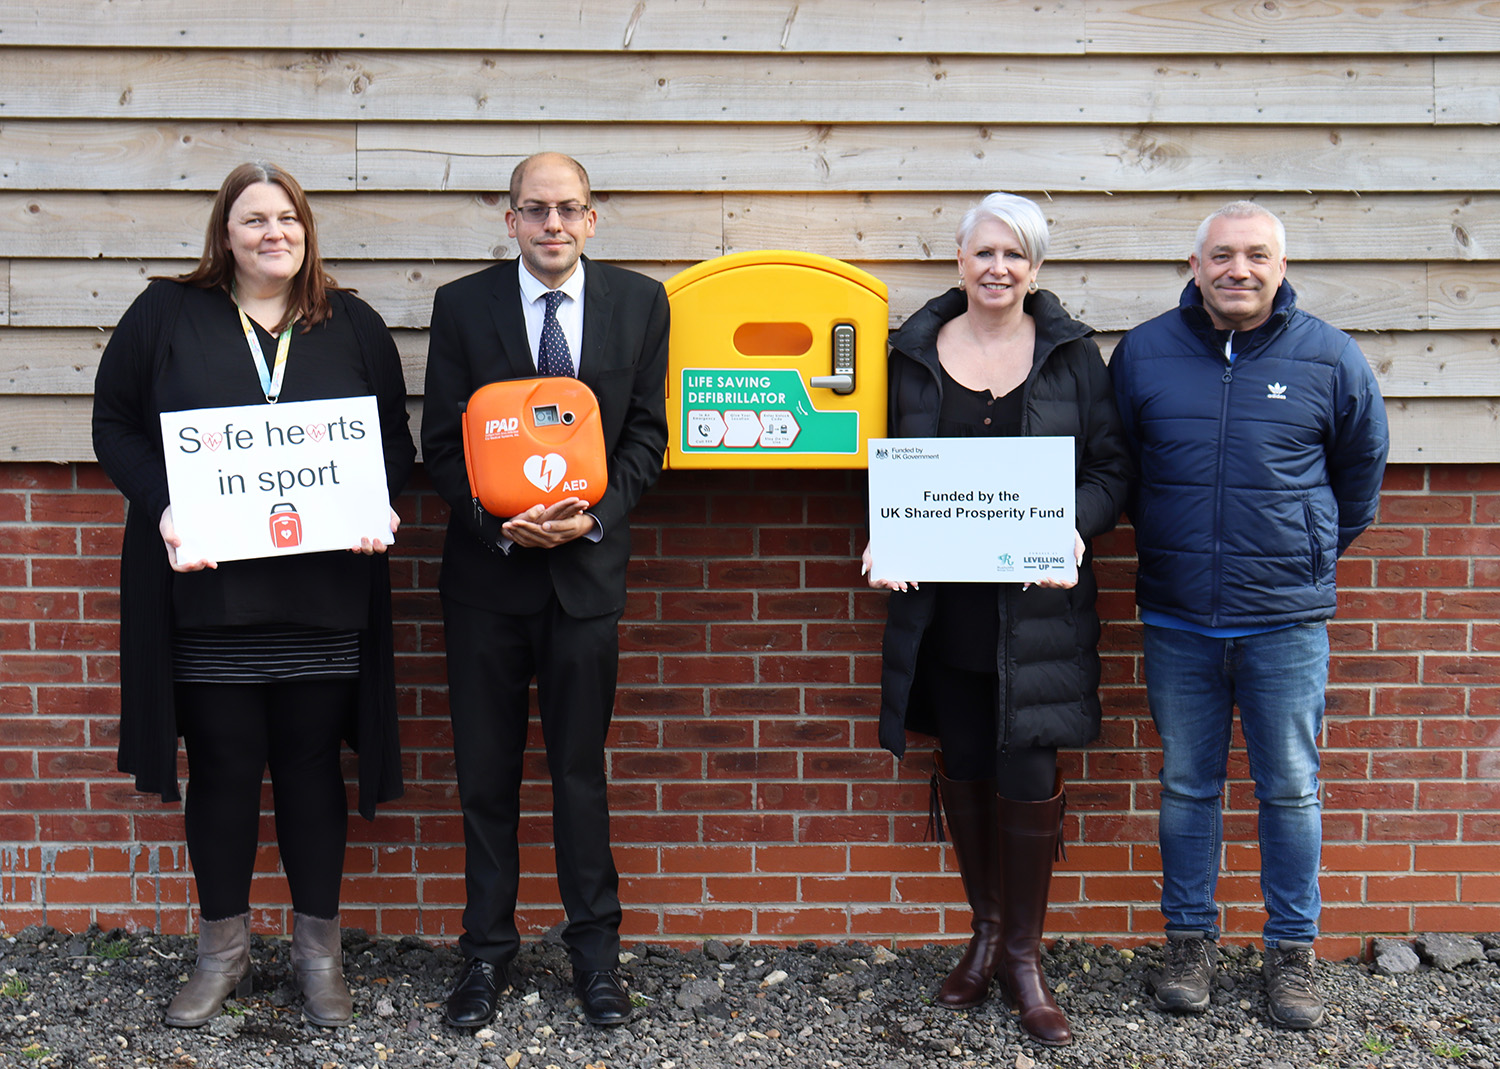 RBC Cabinet Members Cllr Wheeler and Cllr Brennan visited Orston Recreation Ground where a new defibrillator has been installed